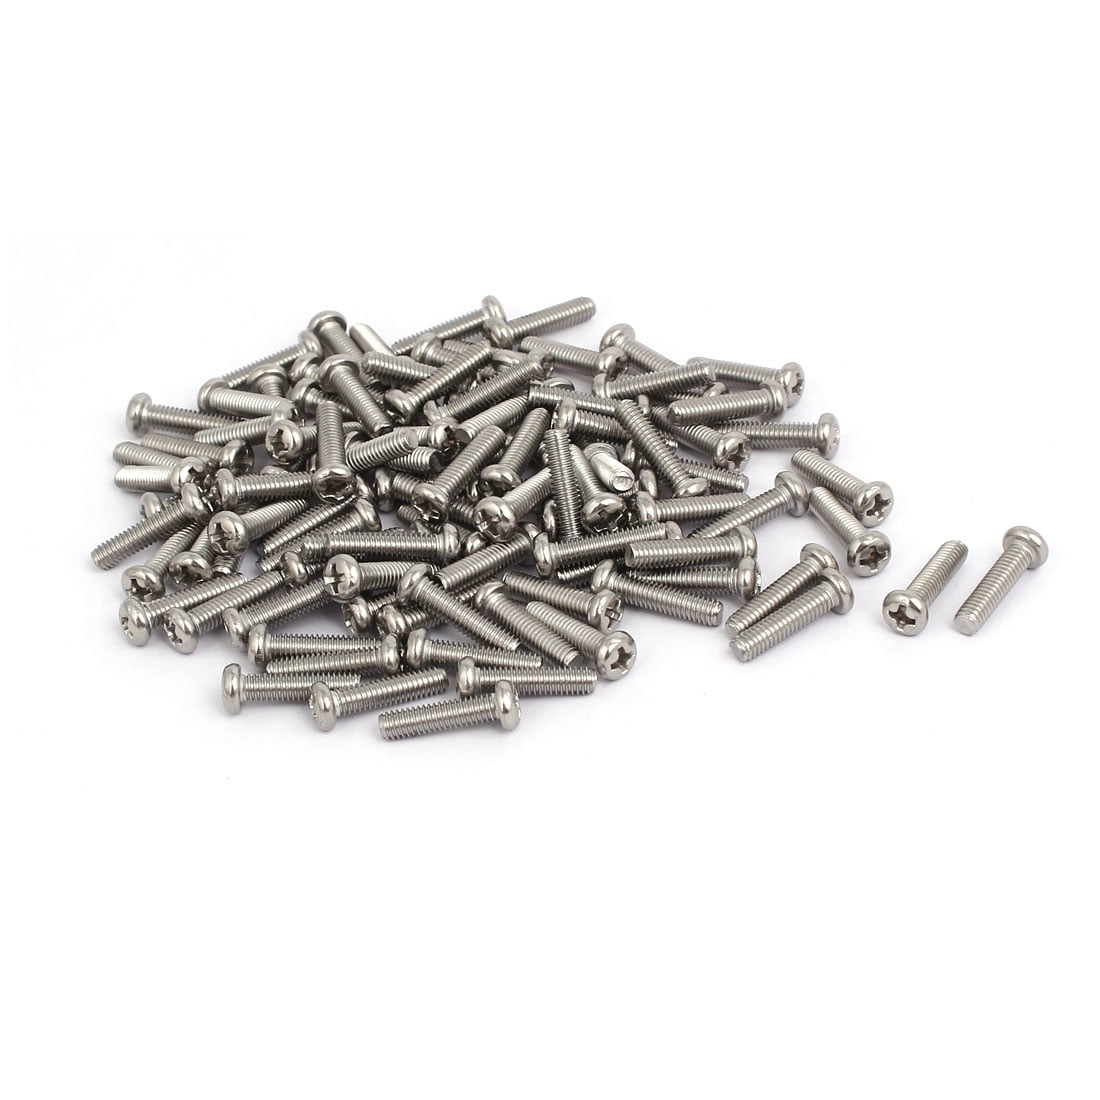 6.5 Length, Pack of 1 Female #8-32 Screw Size Hex Standoff 0.25 OD Stainless Steel 